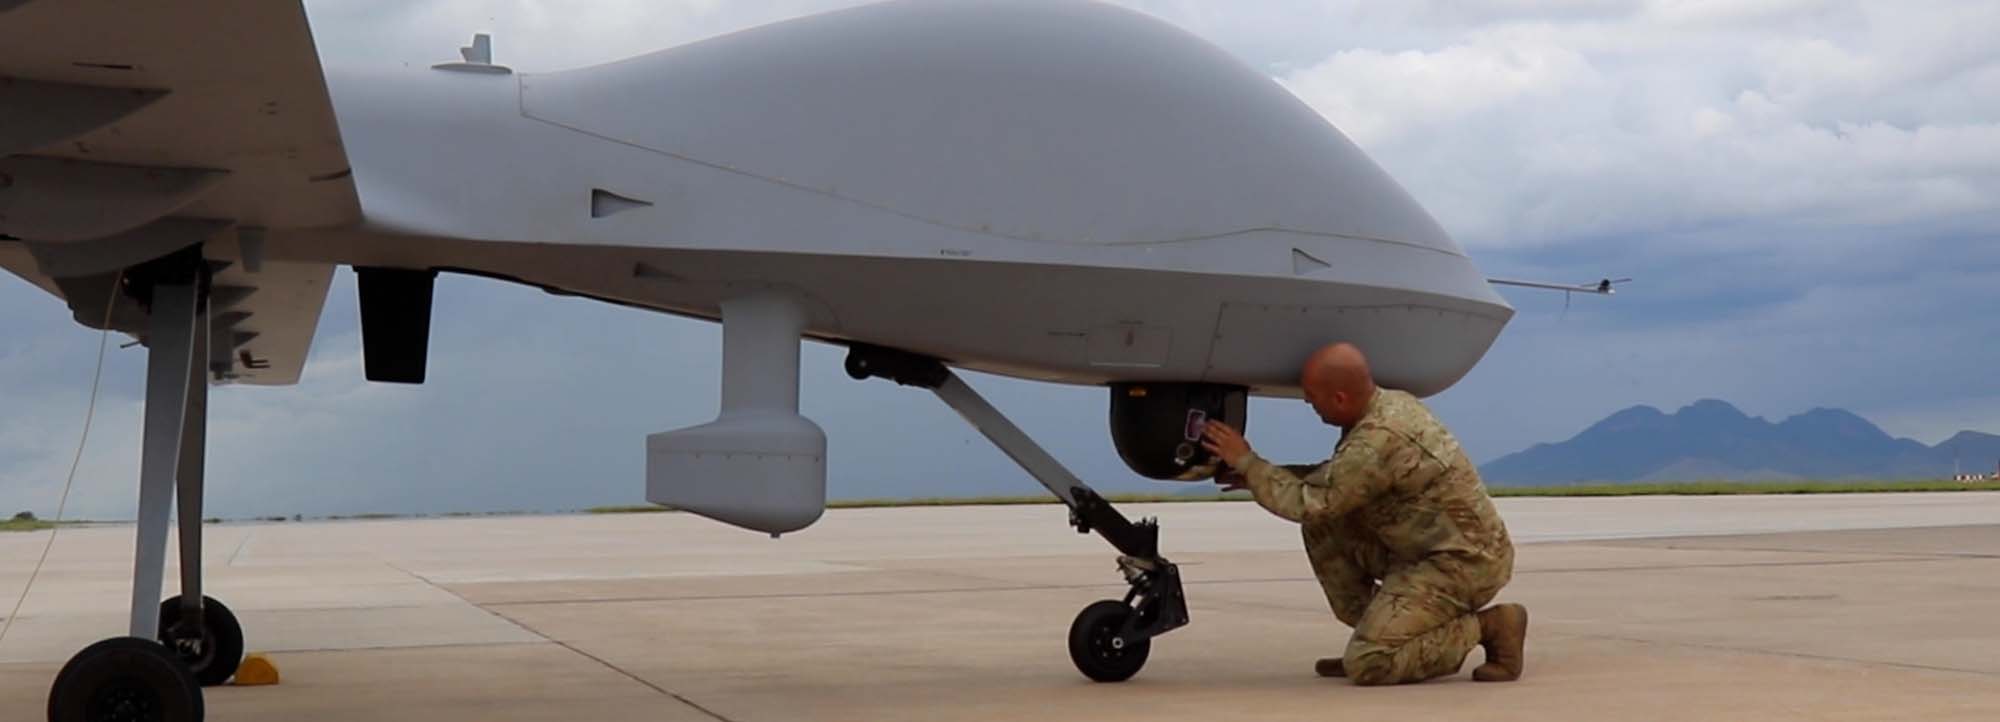 3rd Combat Aviation Brigade, pre-flights the MQ-1C Grey Eagle unmanned aircraft system.